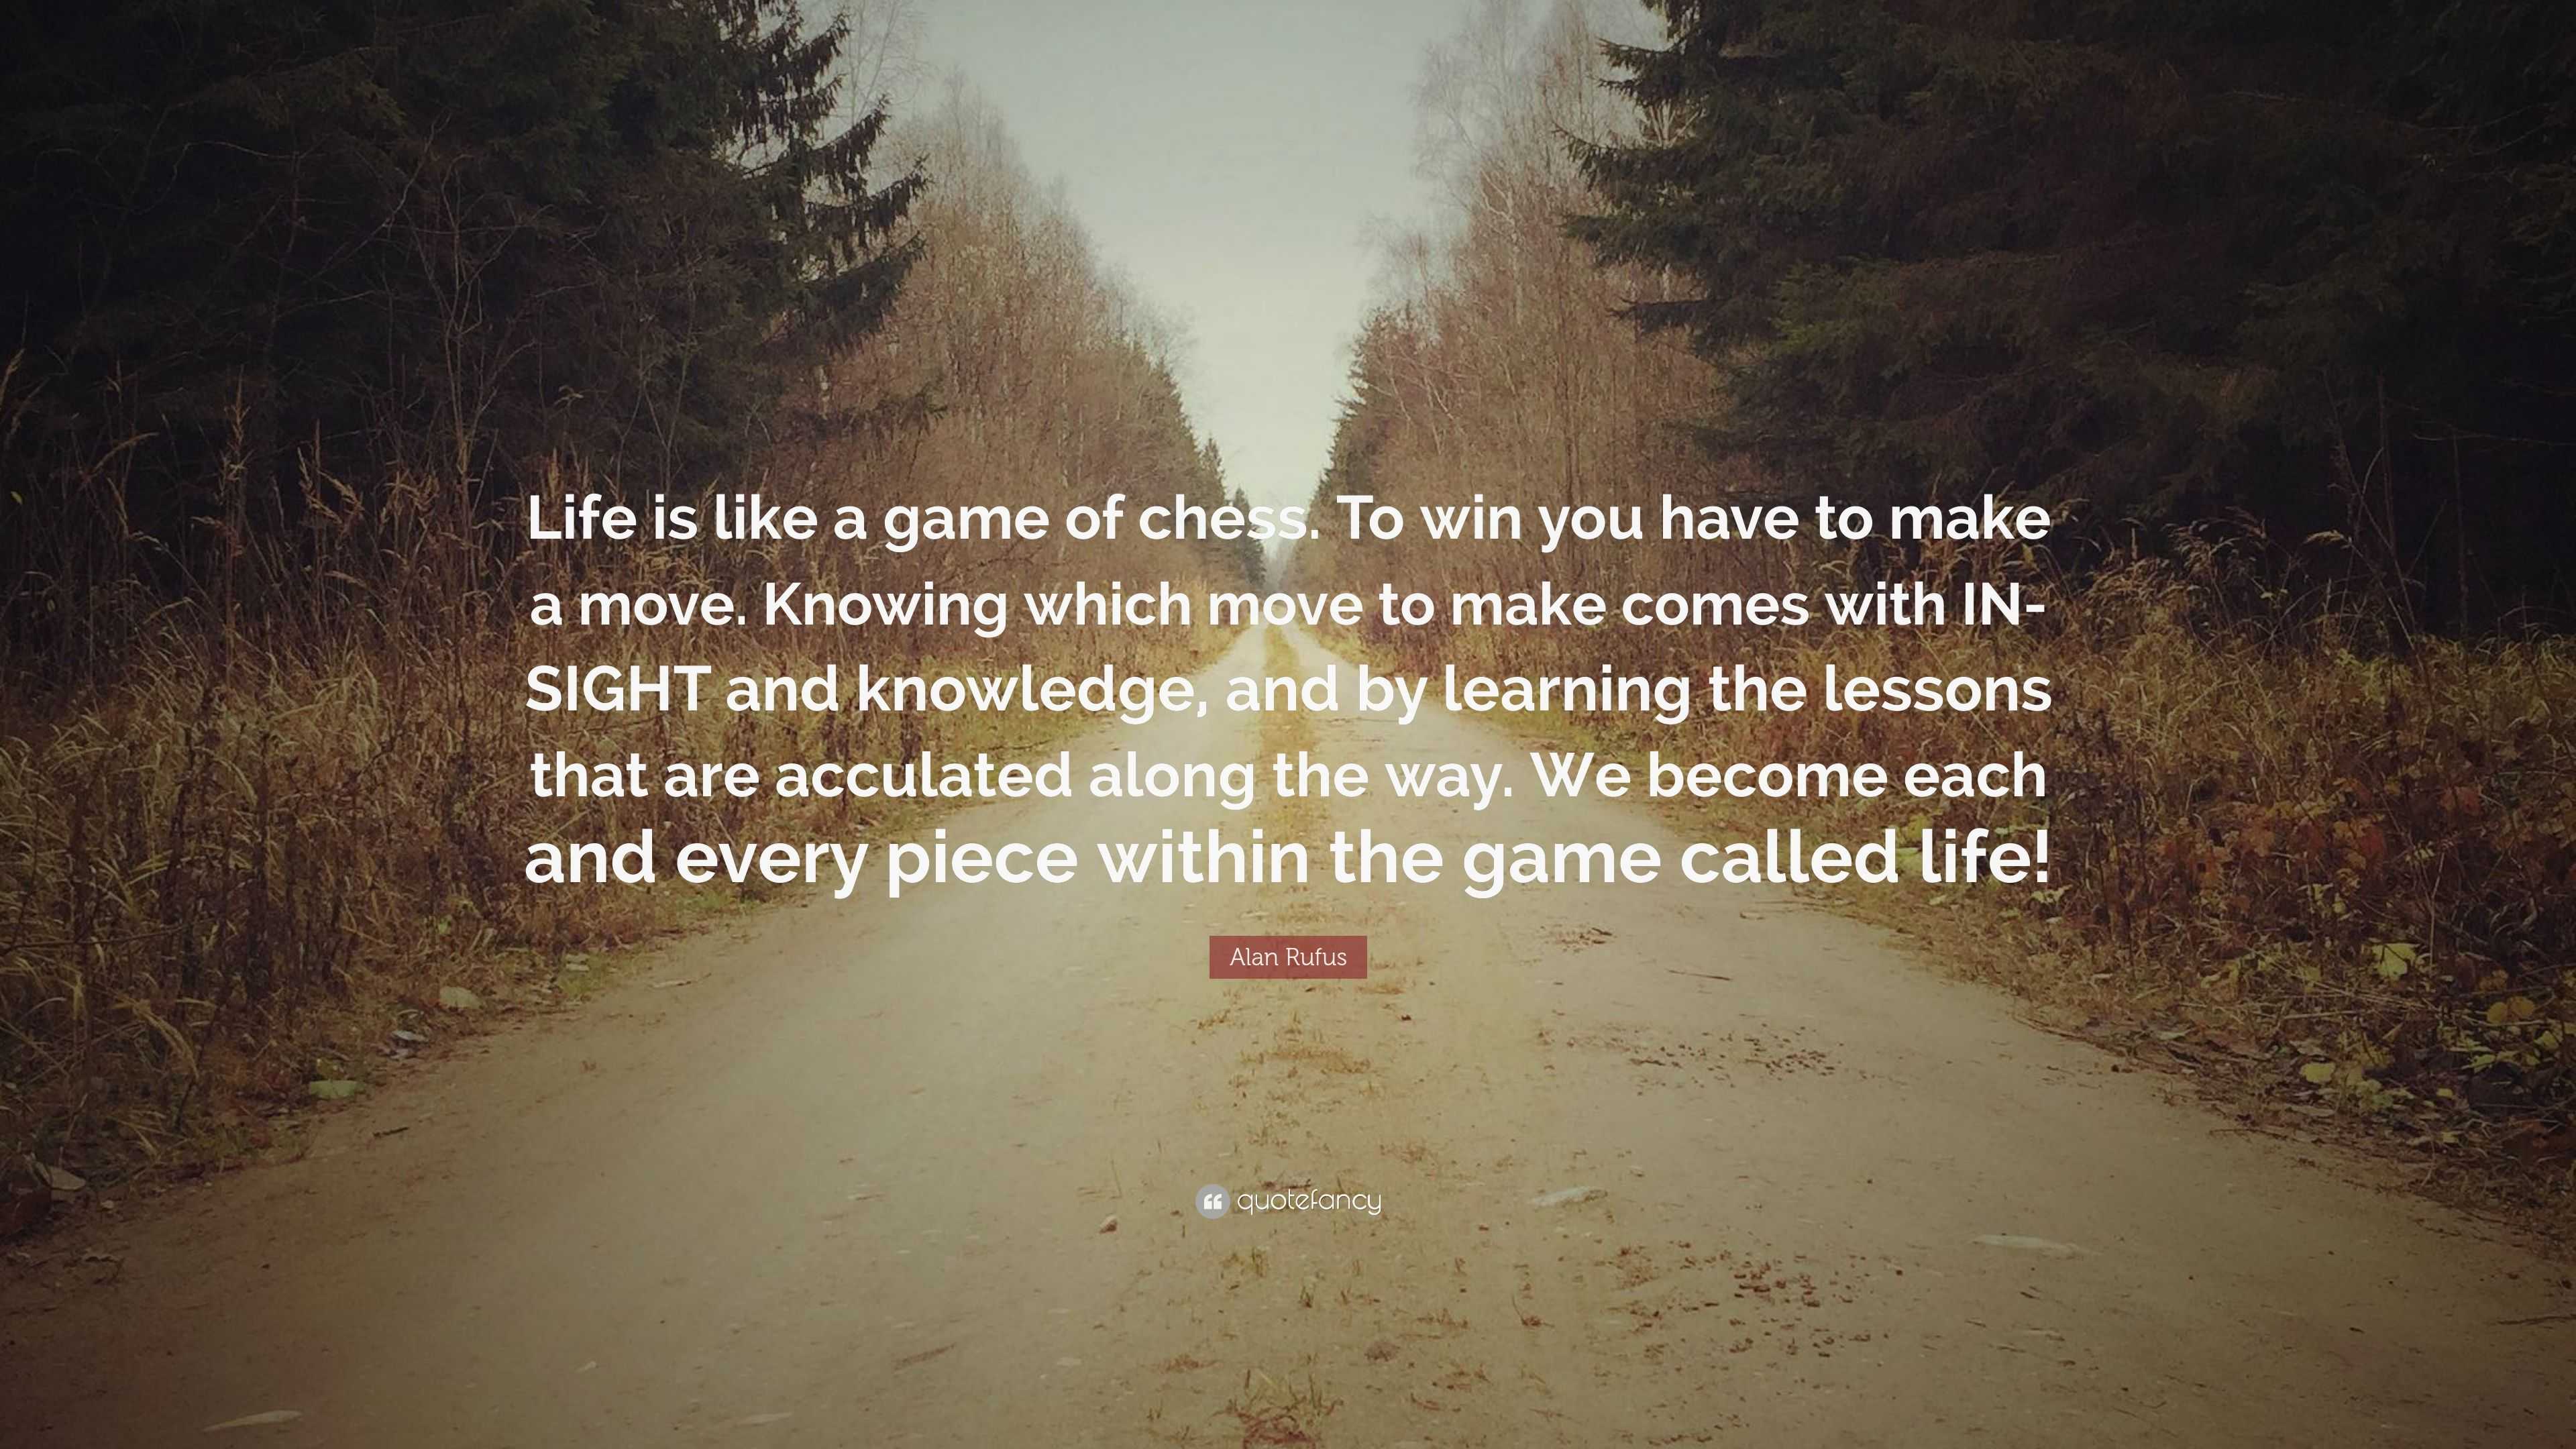 life quotes: Simply put life is a game of chess. #lifequotes #amazing #life  #quotes